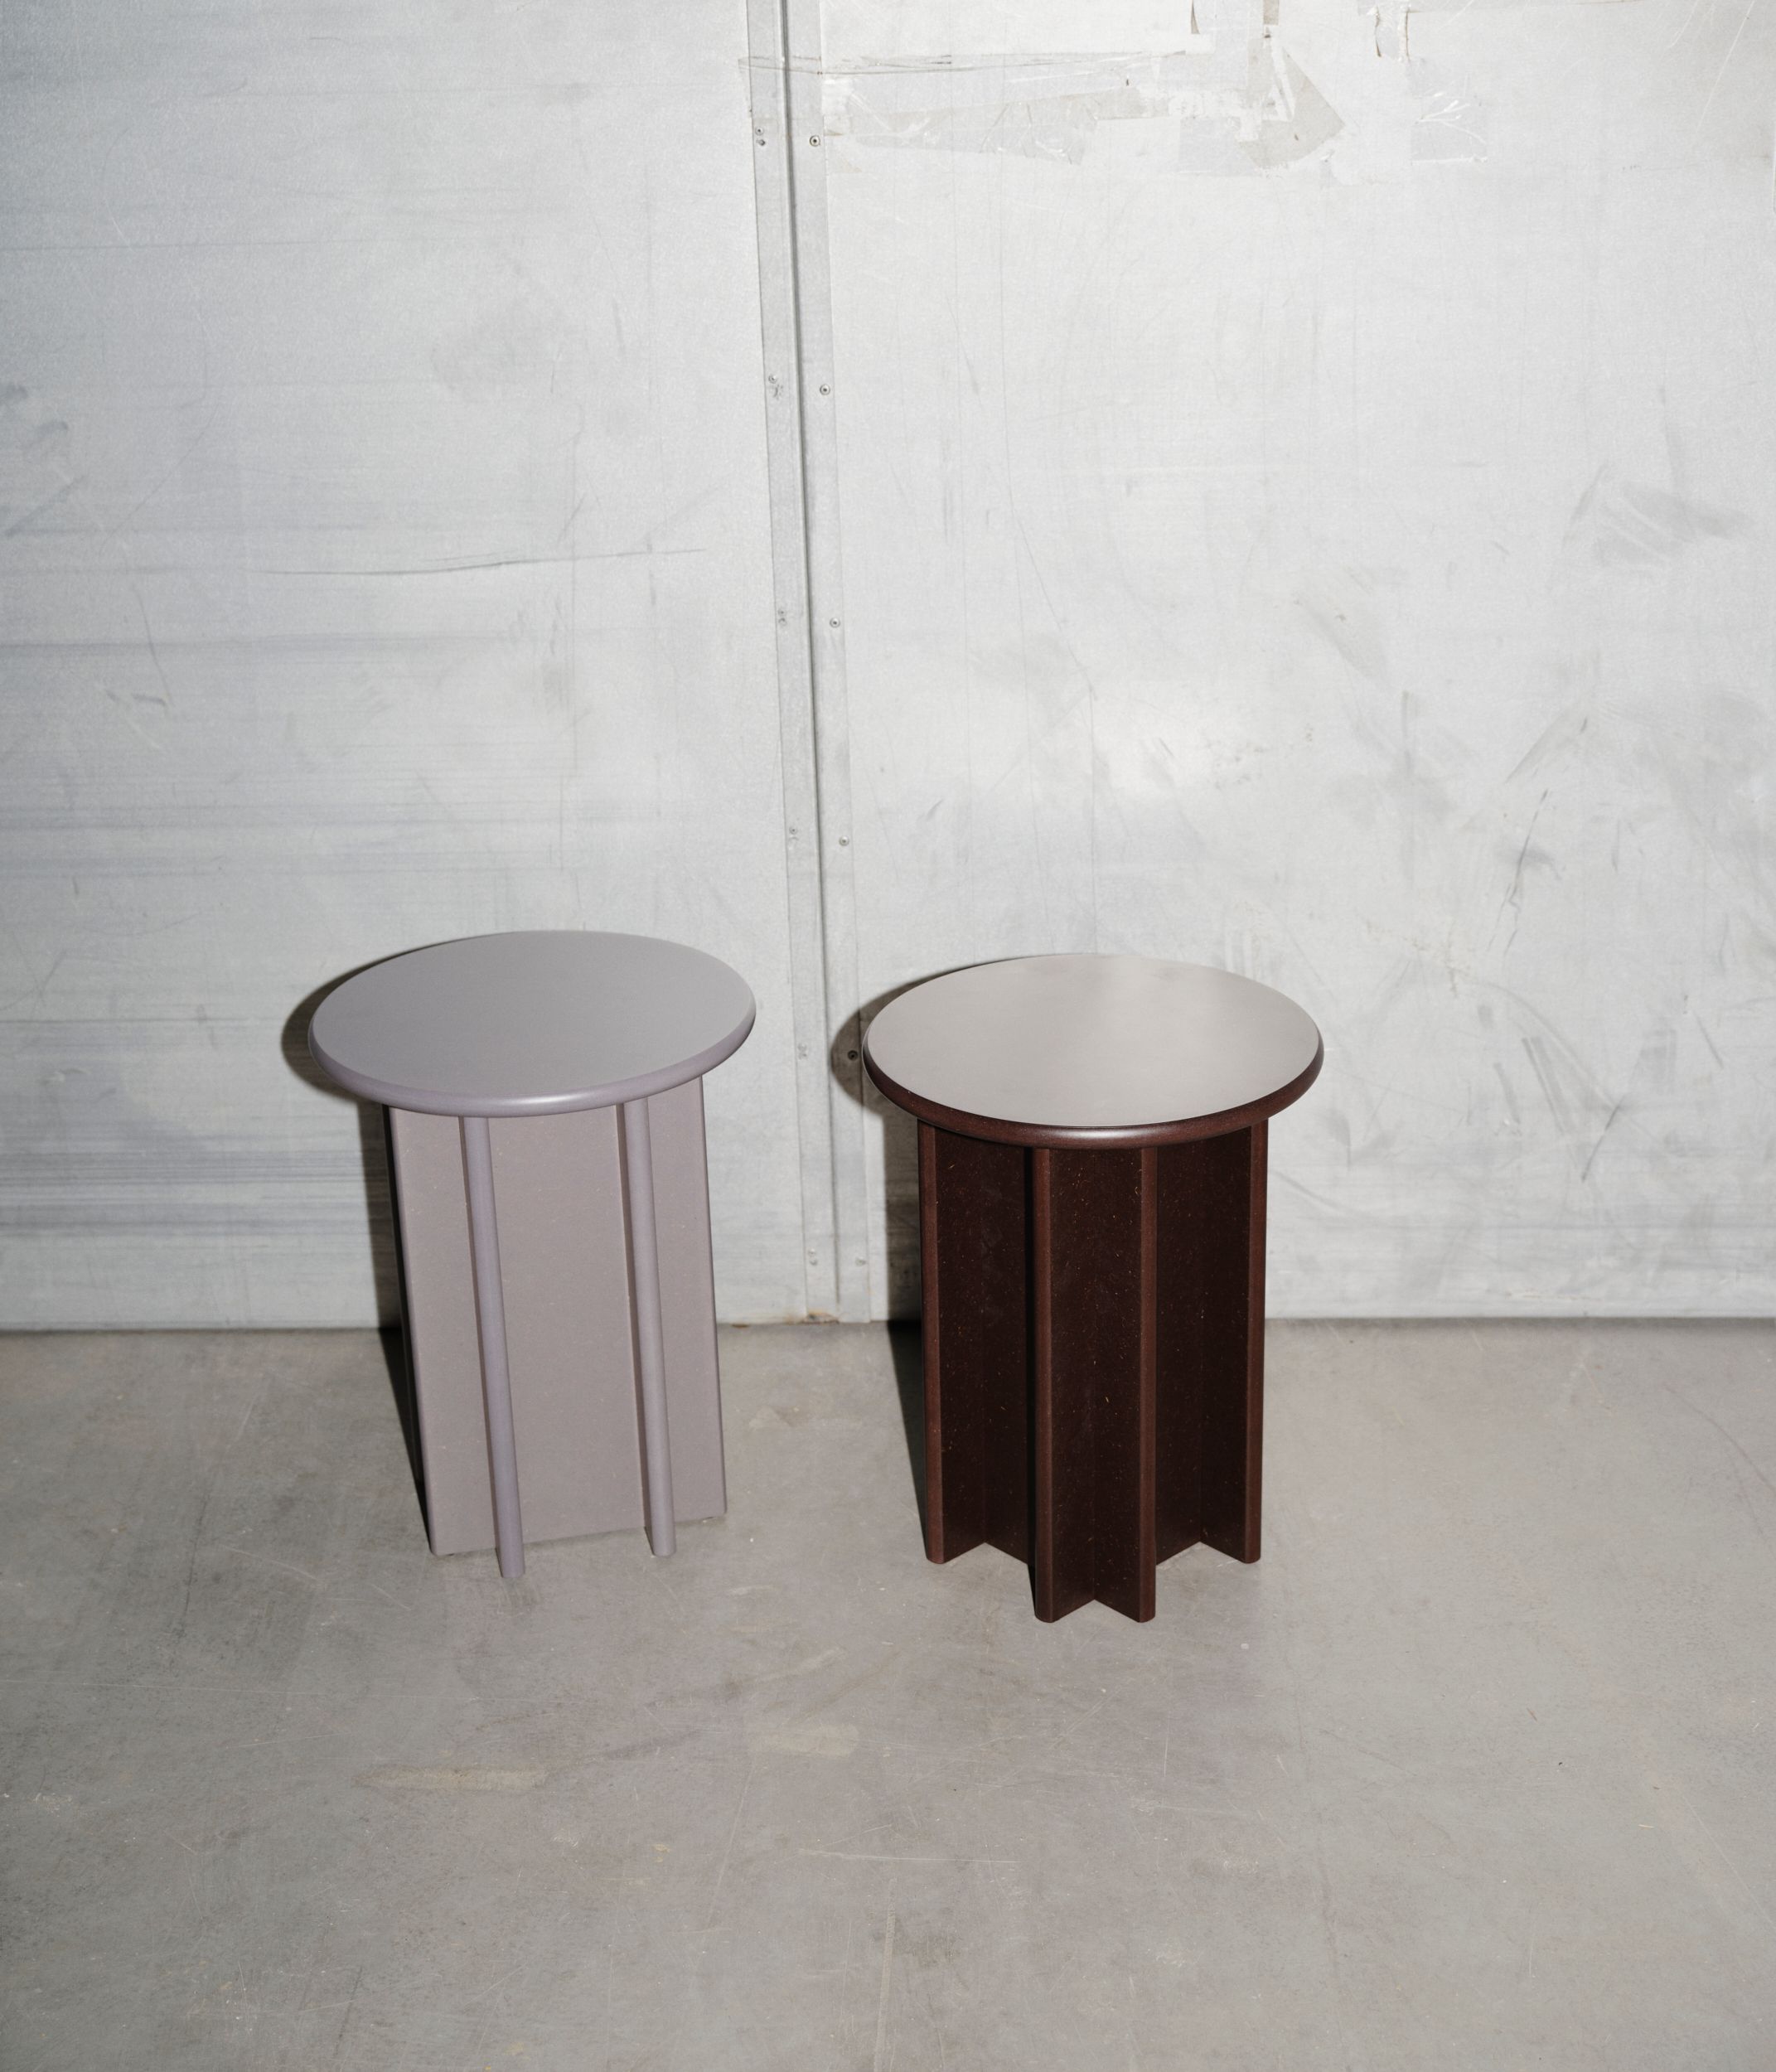 Guide image – COLLECT Stool